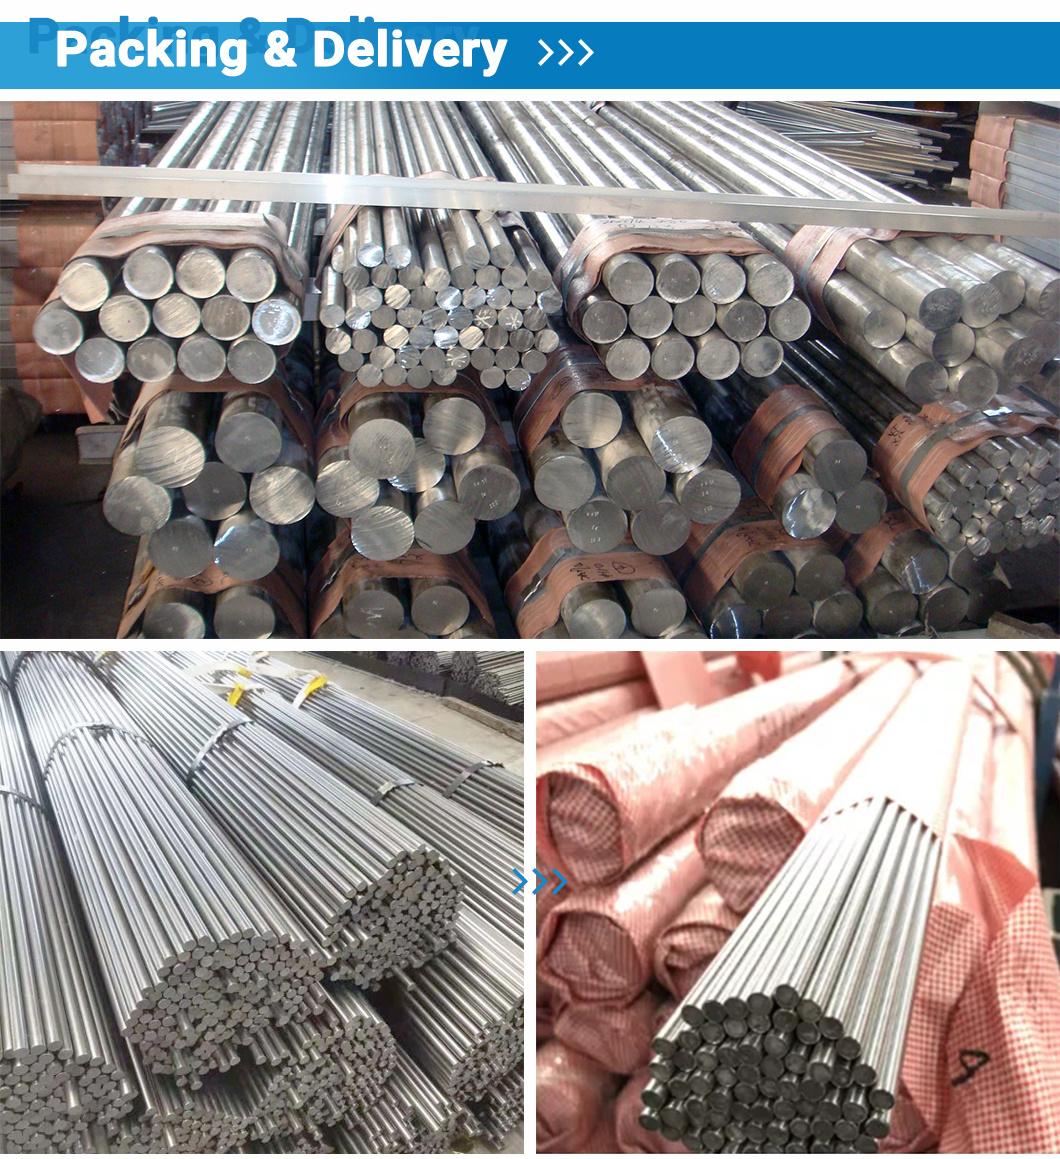 304 316 304L 316L Hot Rolled /Cold Rolled/Cold Drawing/Welded Alloy Metal Stainless Ss Steel Round Bar/Rod